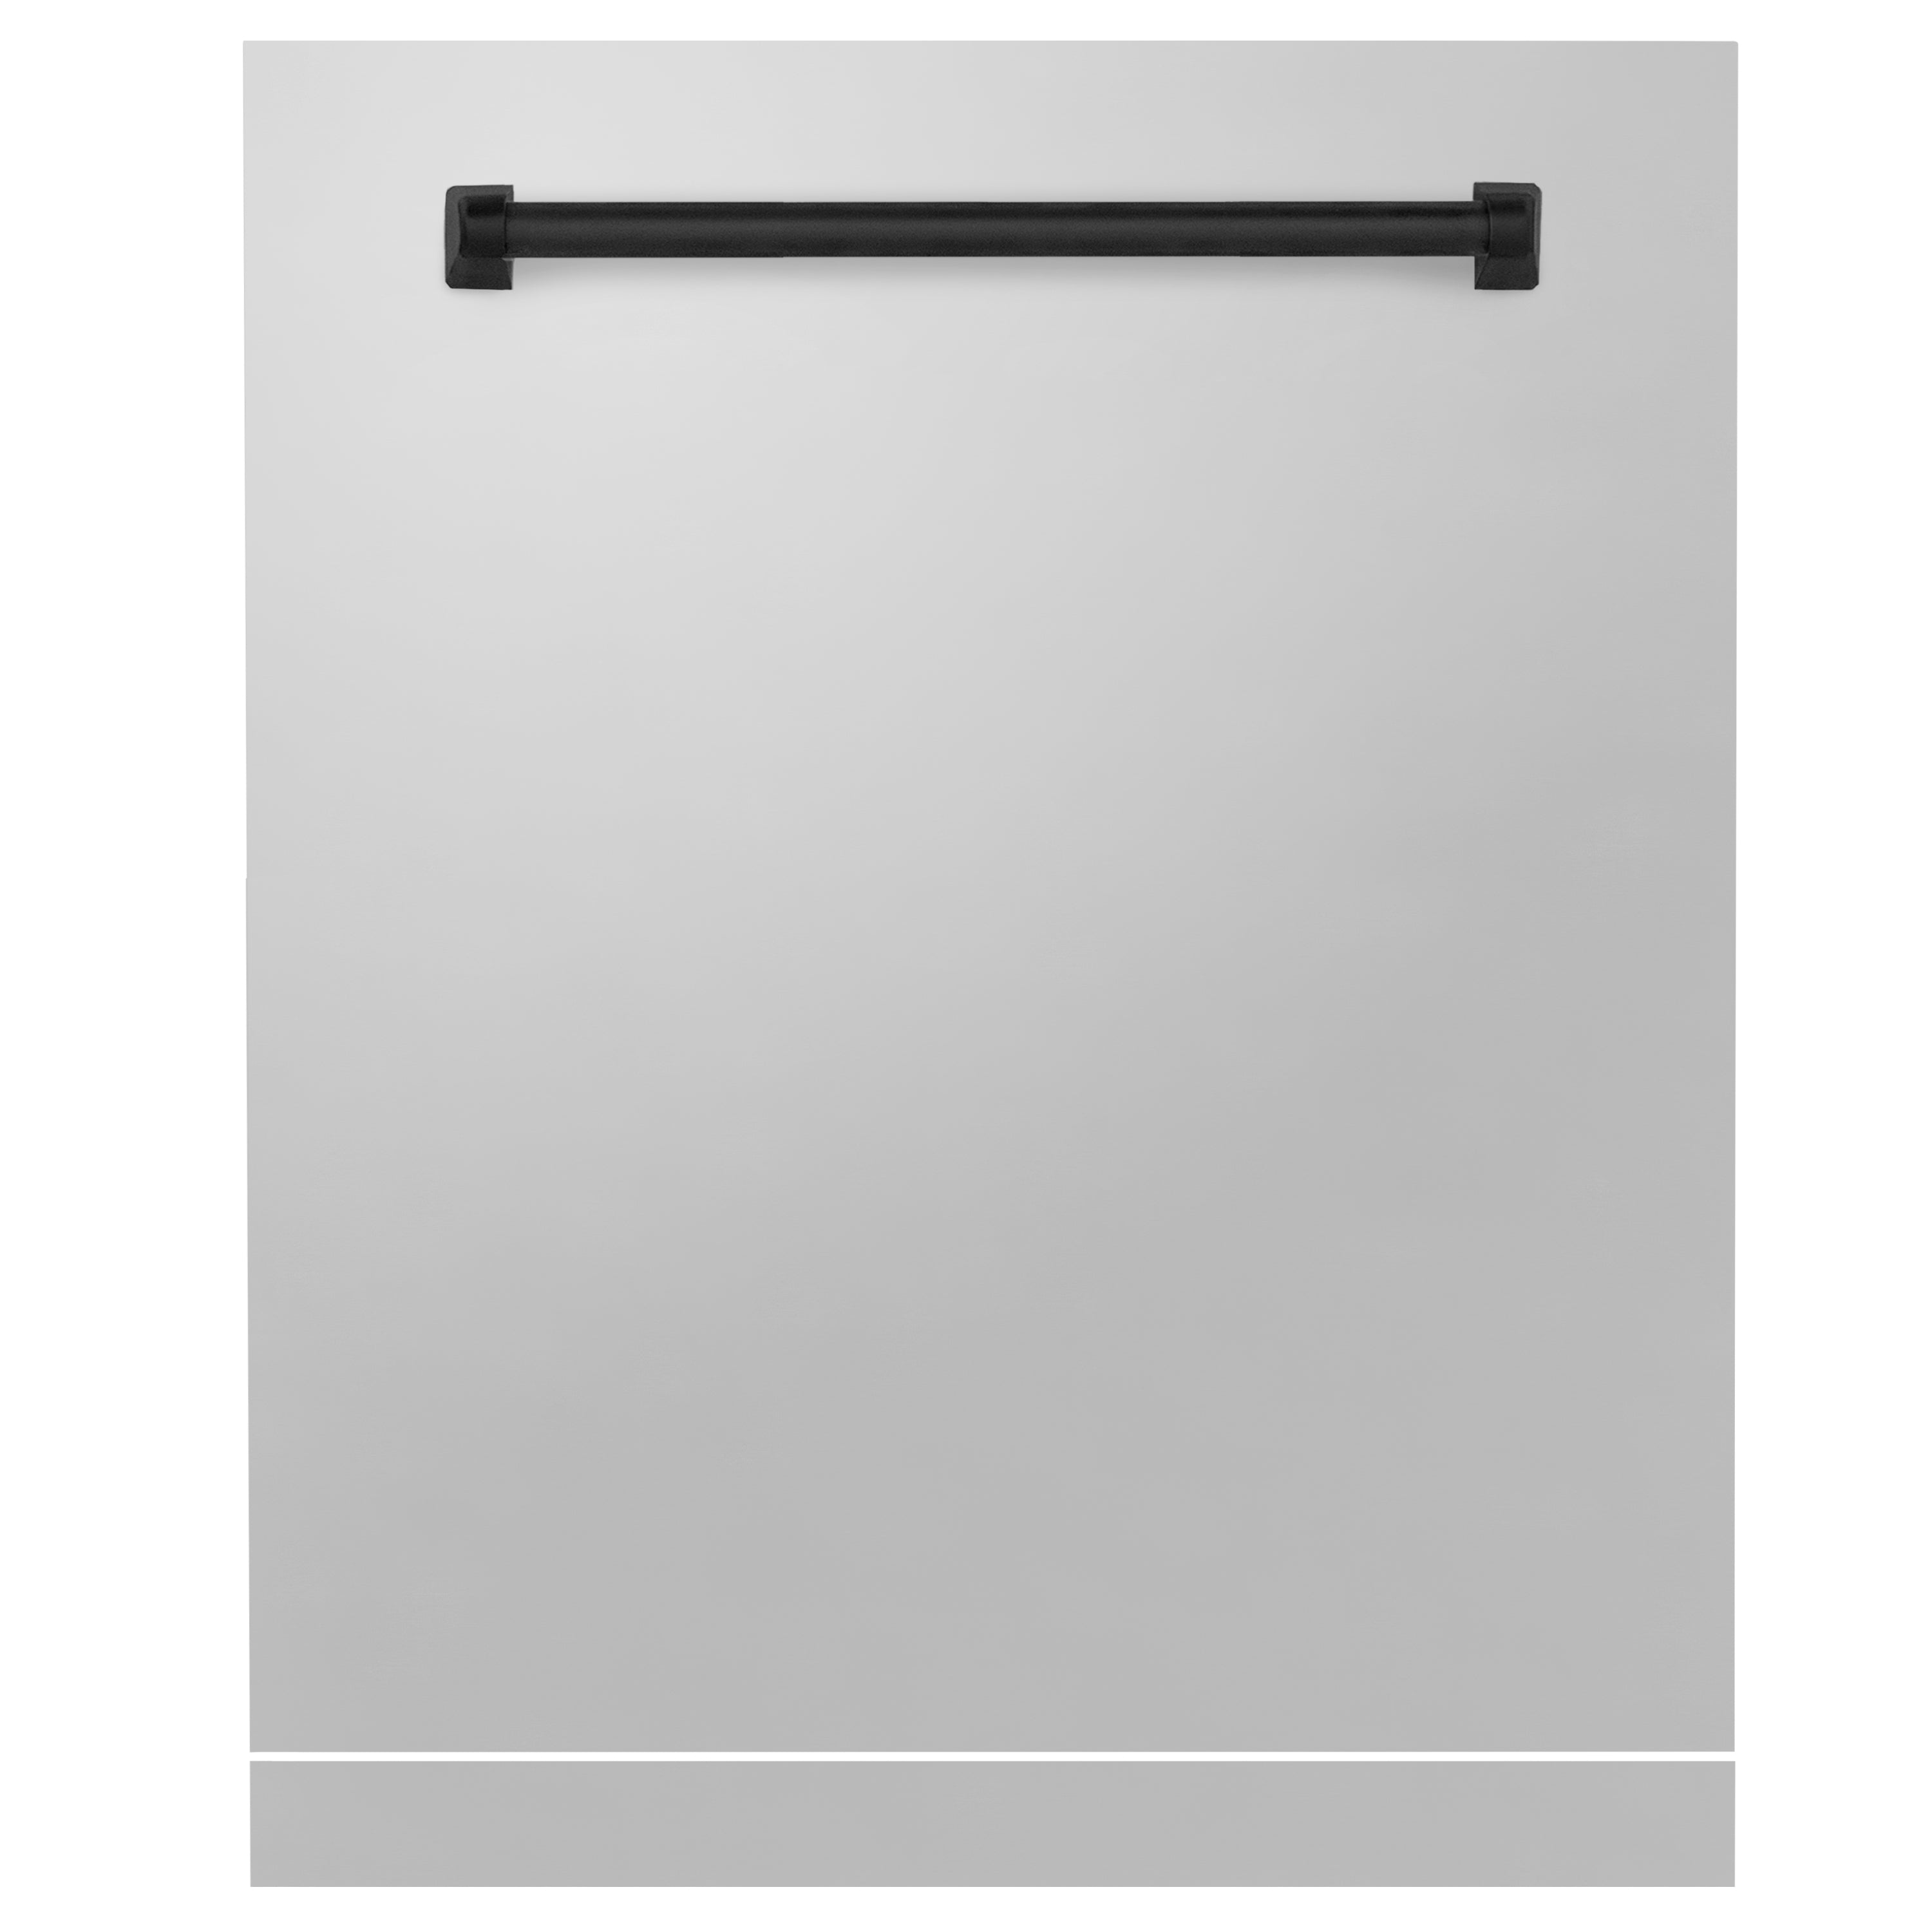 ZLINE 24" Autograph Edition Monument Dishwasher Panel in Stainless Steel with Matte Black Handle (DPMTZ-304-24-MB)